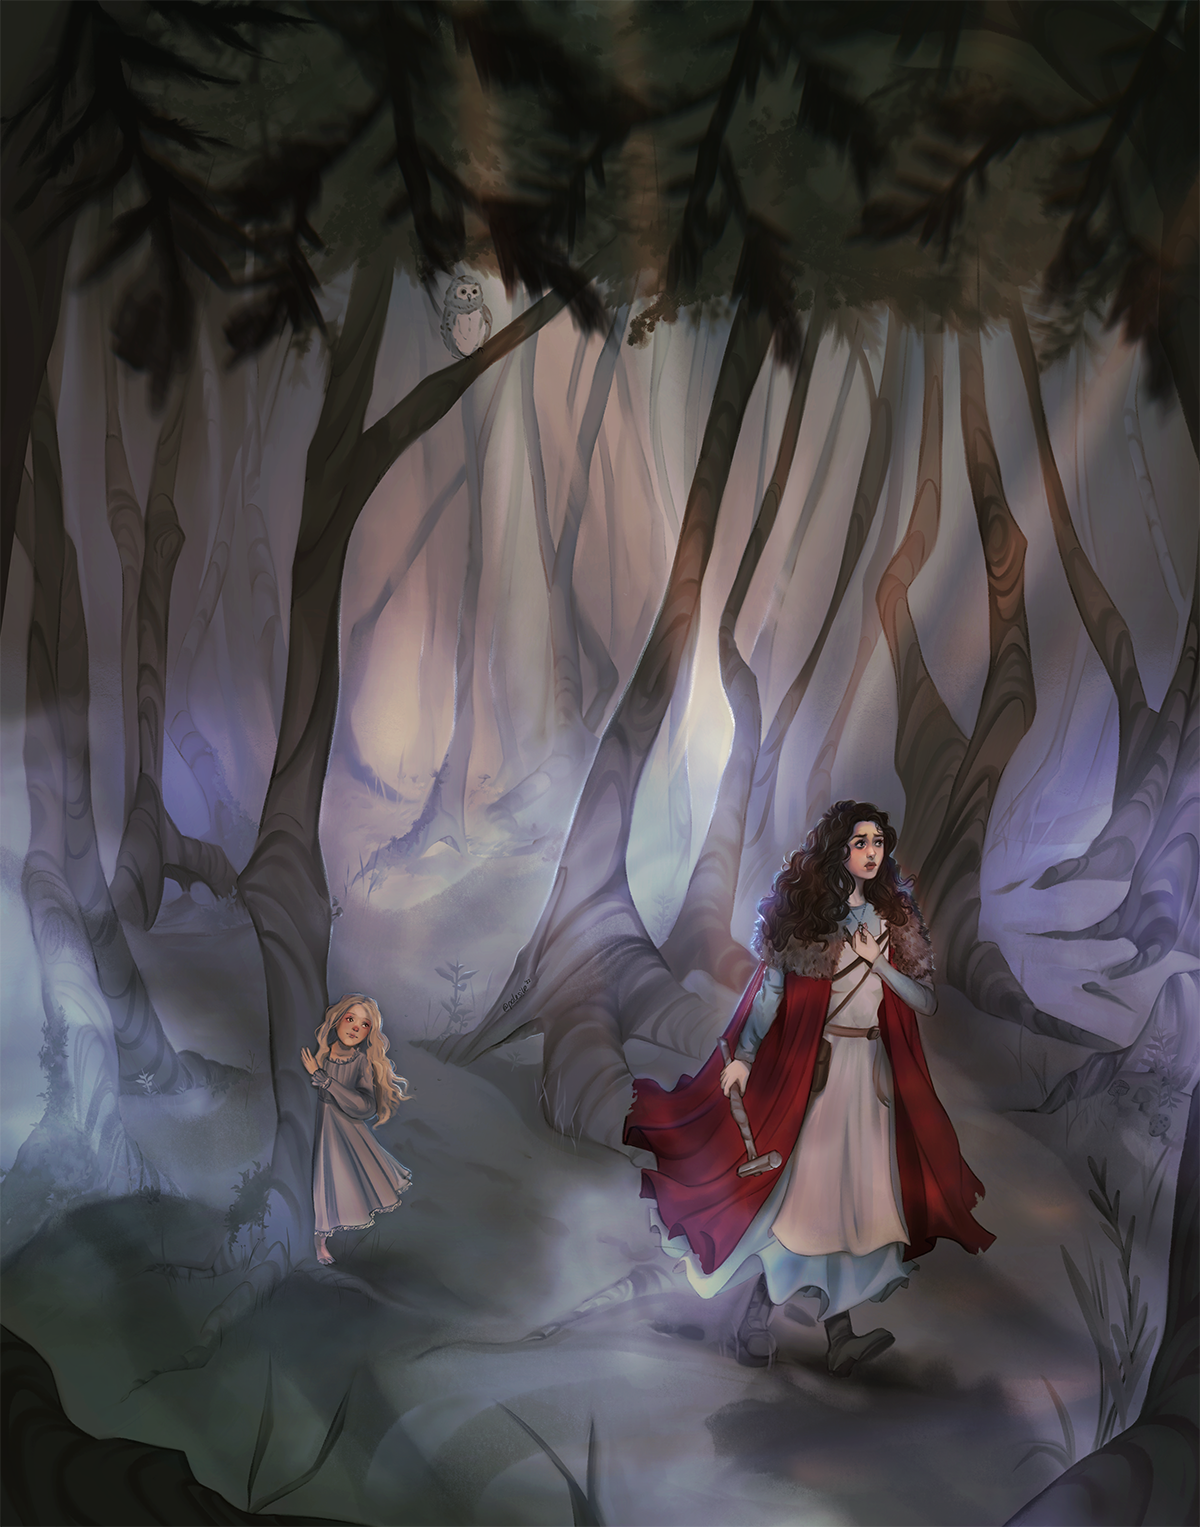 The Road of Bones art- Silla Nordvig walking through the Twisted Pinewoods, followed by the little blonde girl